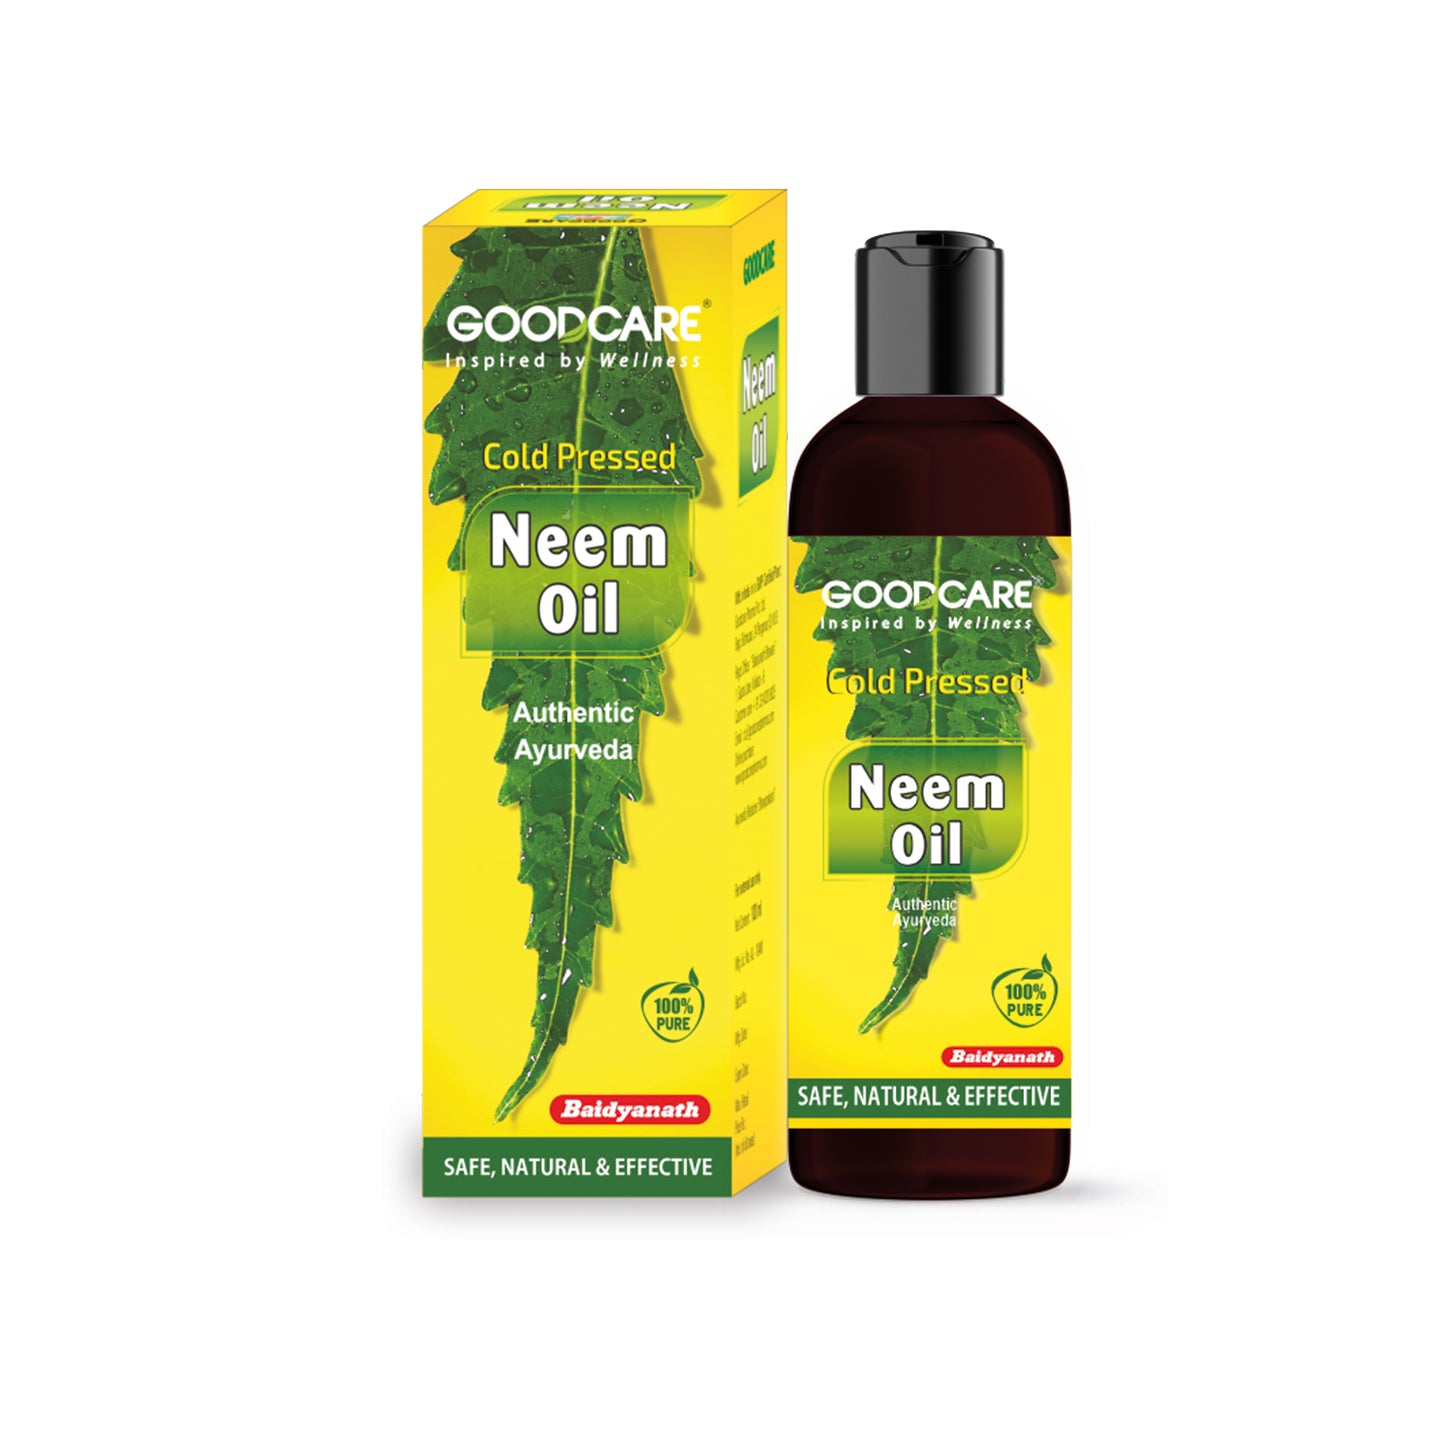 GOODCARE 100% Pure & Natural Premium Cold Pressed Neem Oil for Hair & Skin - Removes pimples, acne and heals fungal infection from skin, lightens scars and pigmentation - 100 ml